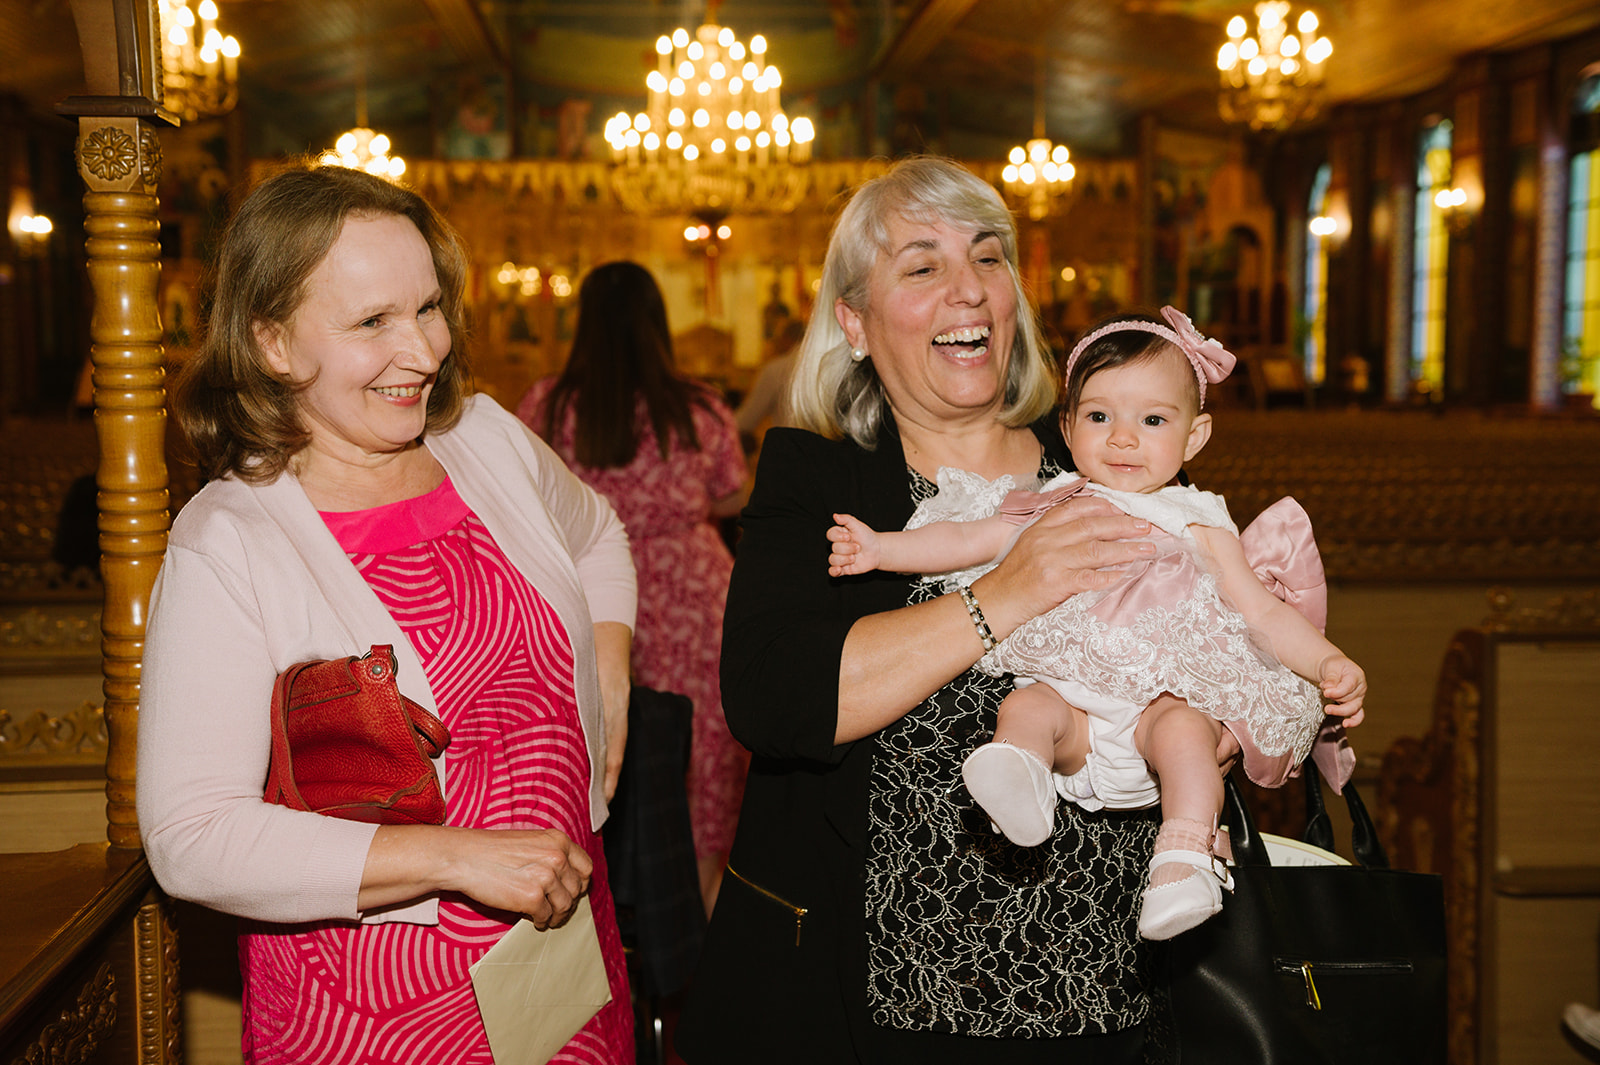 baby girl with her grandmas in the church for her christening